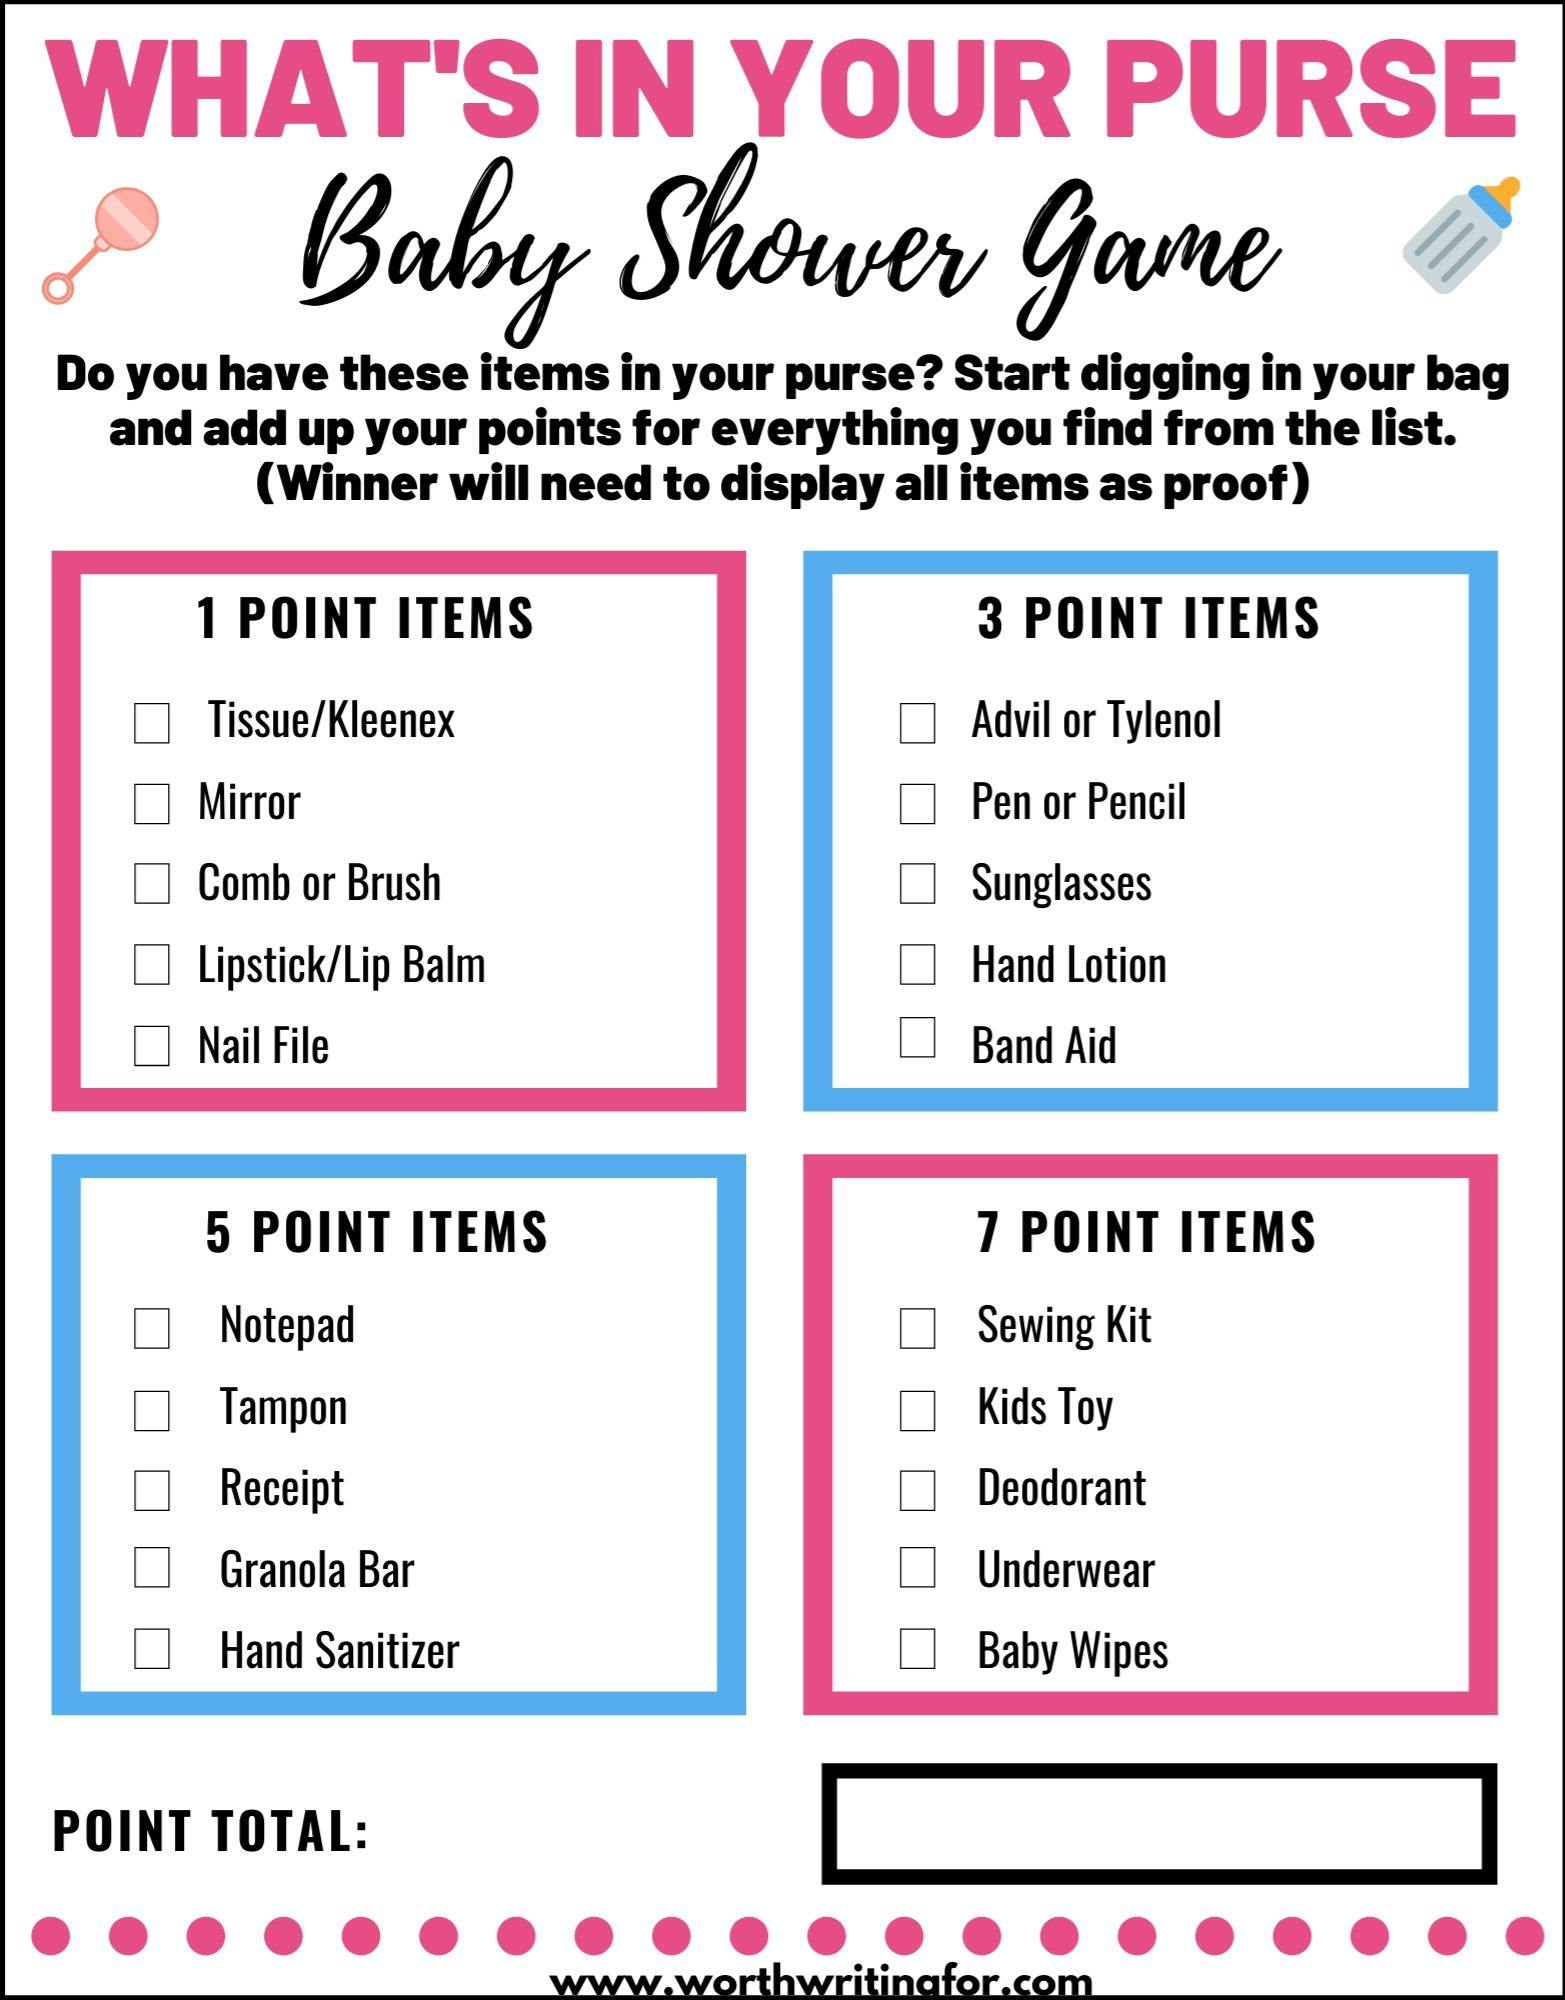 free-printable-what-s-in-your-purse-baby-shower-game